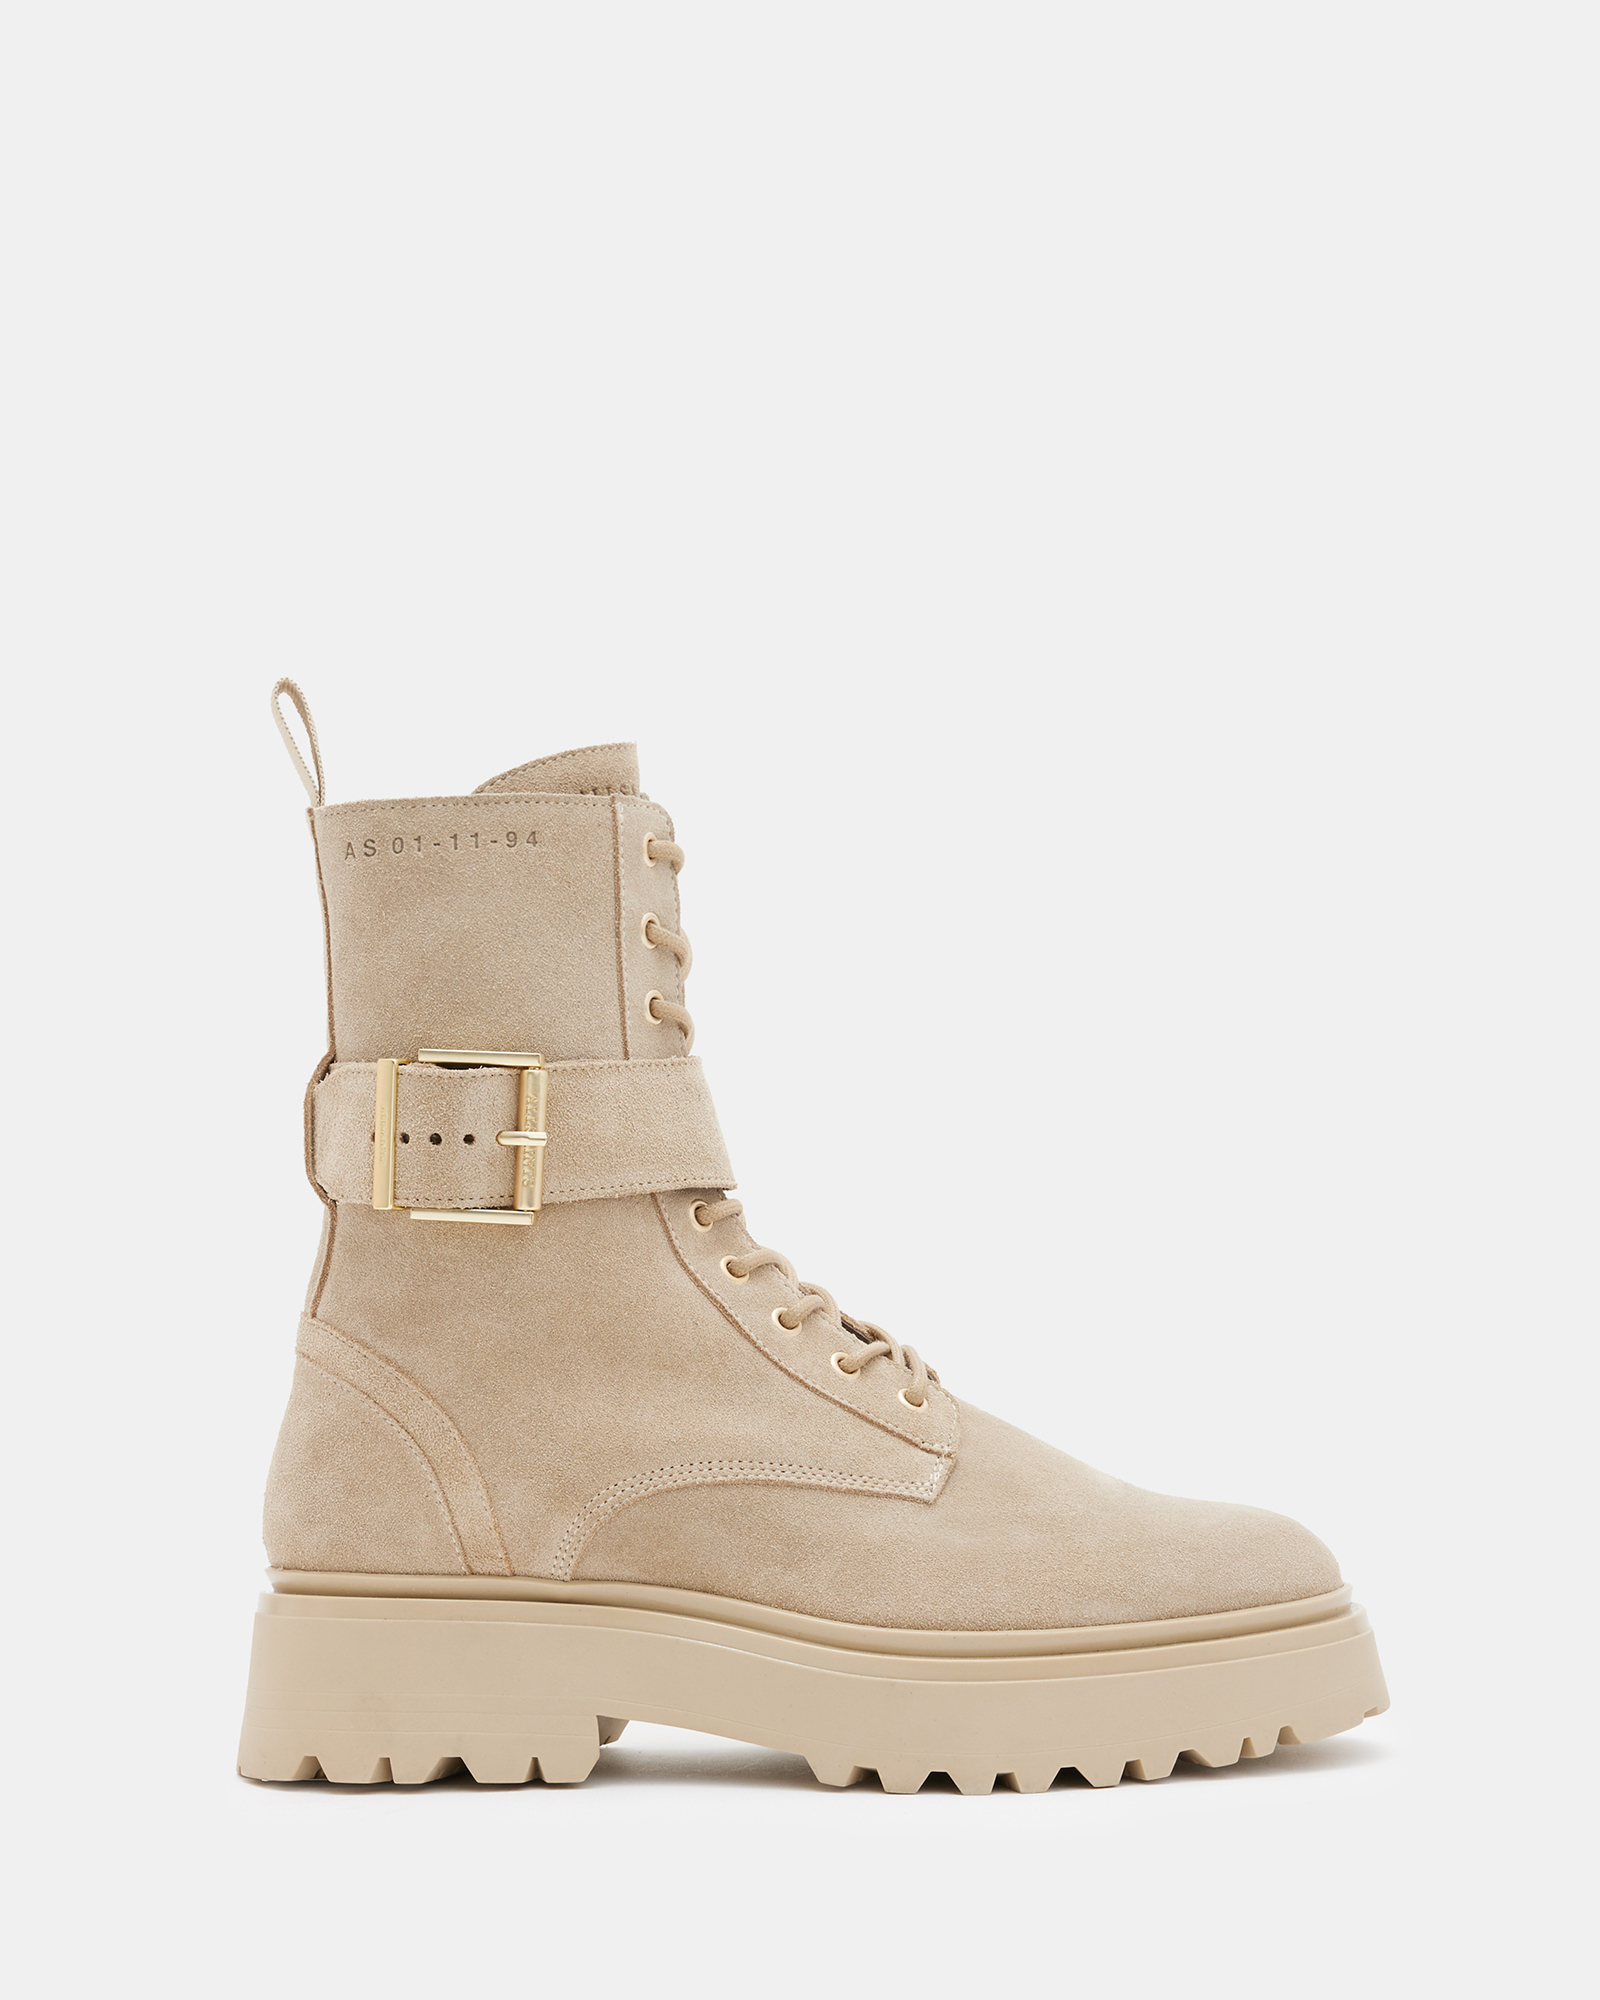 AllSaints Onyx Suede Buckle Boots,, SAND BROWN